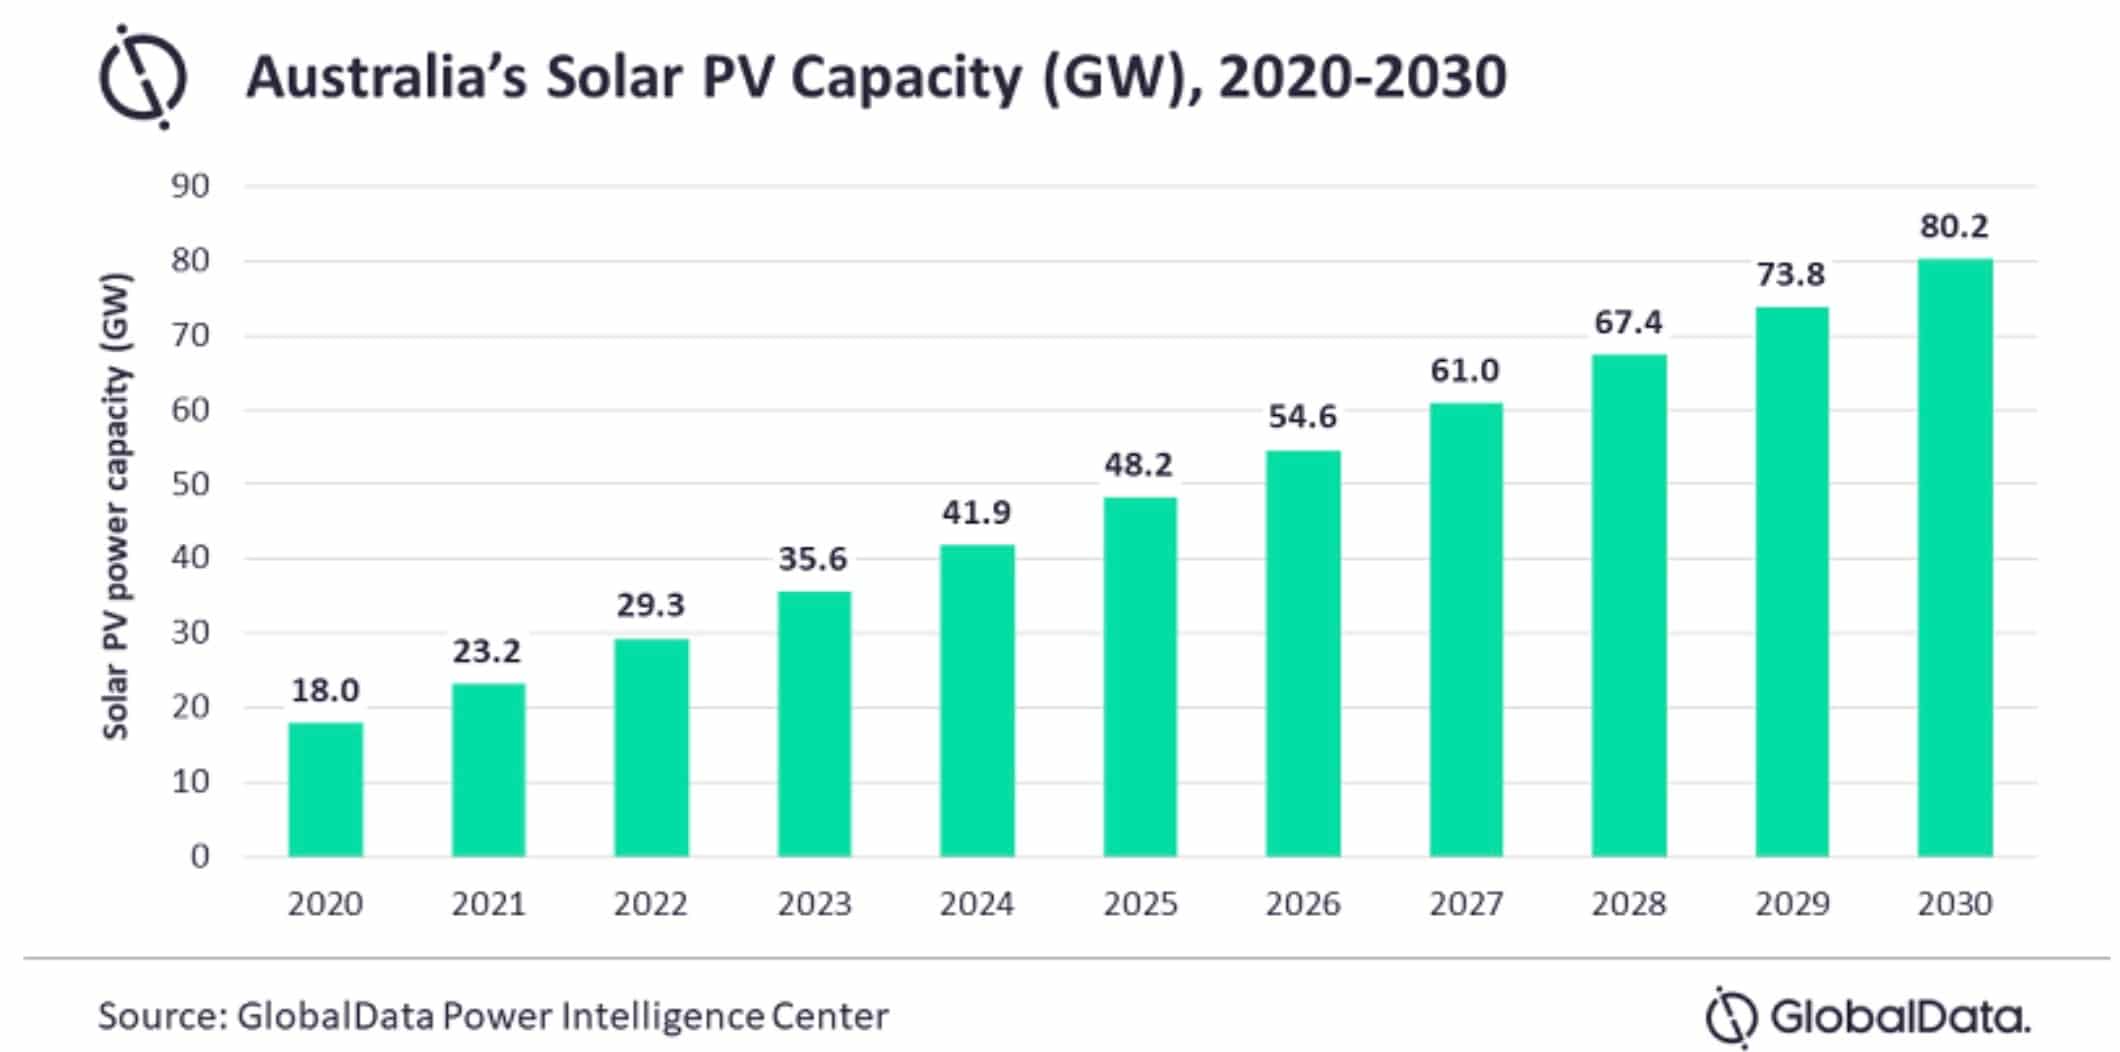 new-report-forecasts-australia-s-solar-capacity-to-reach-80-gw-by-2030